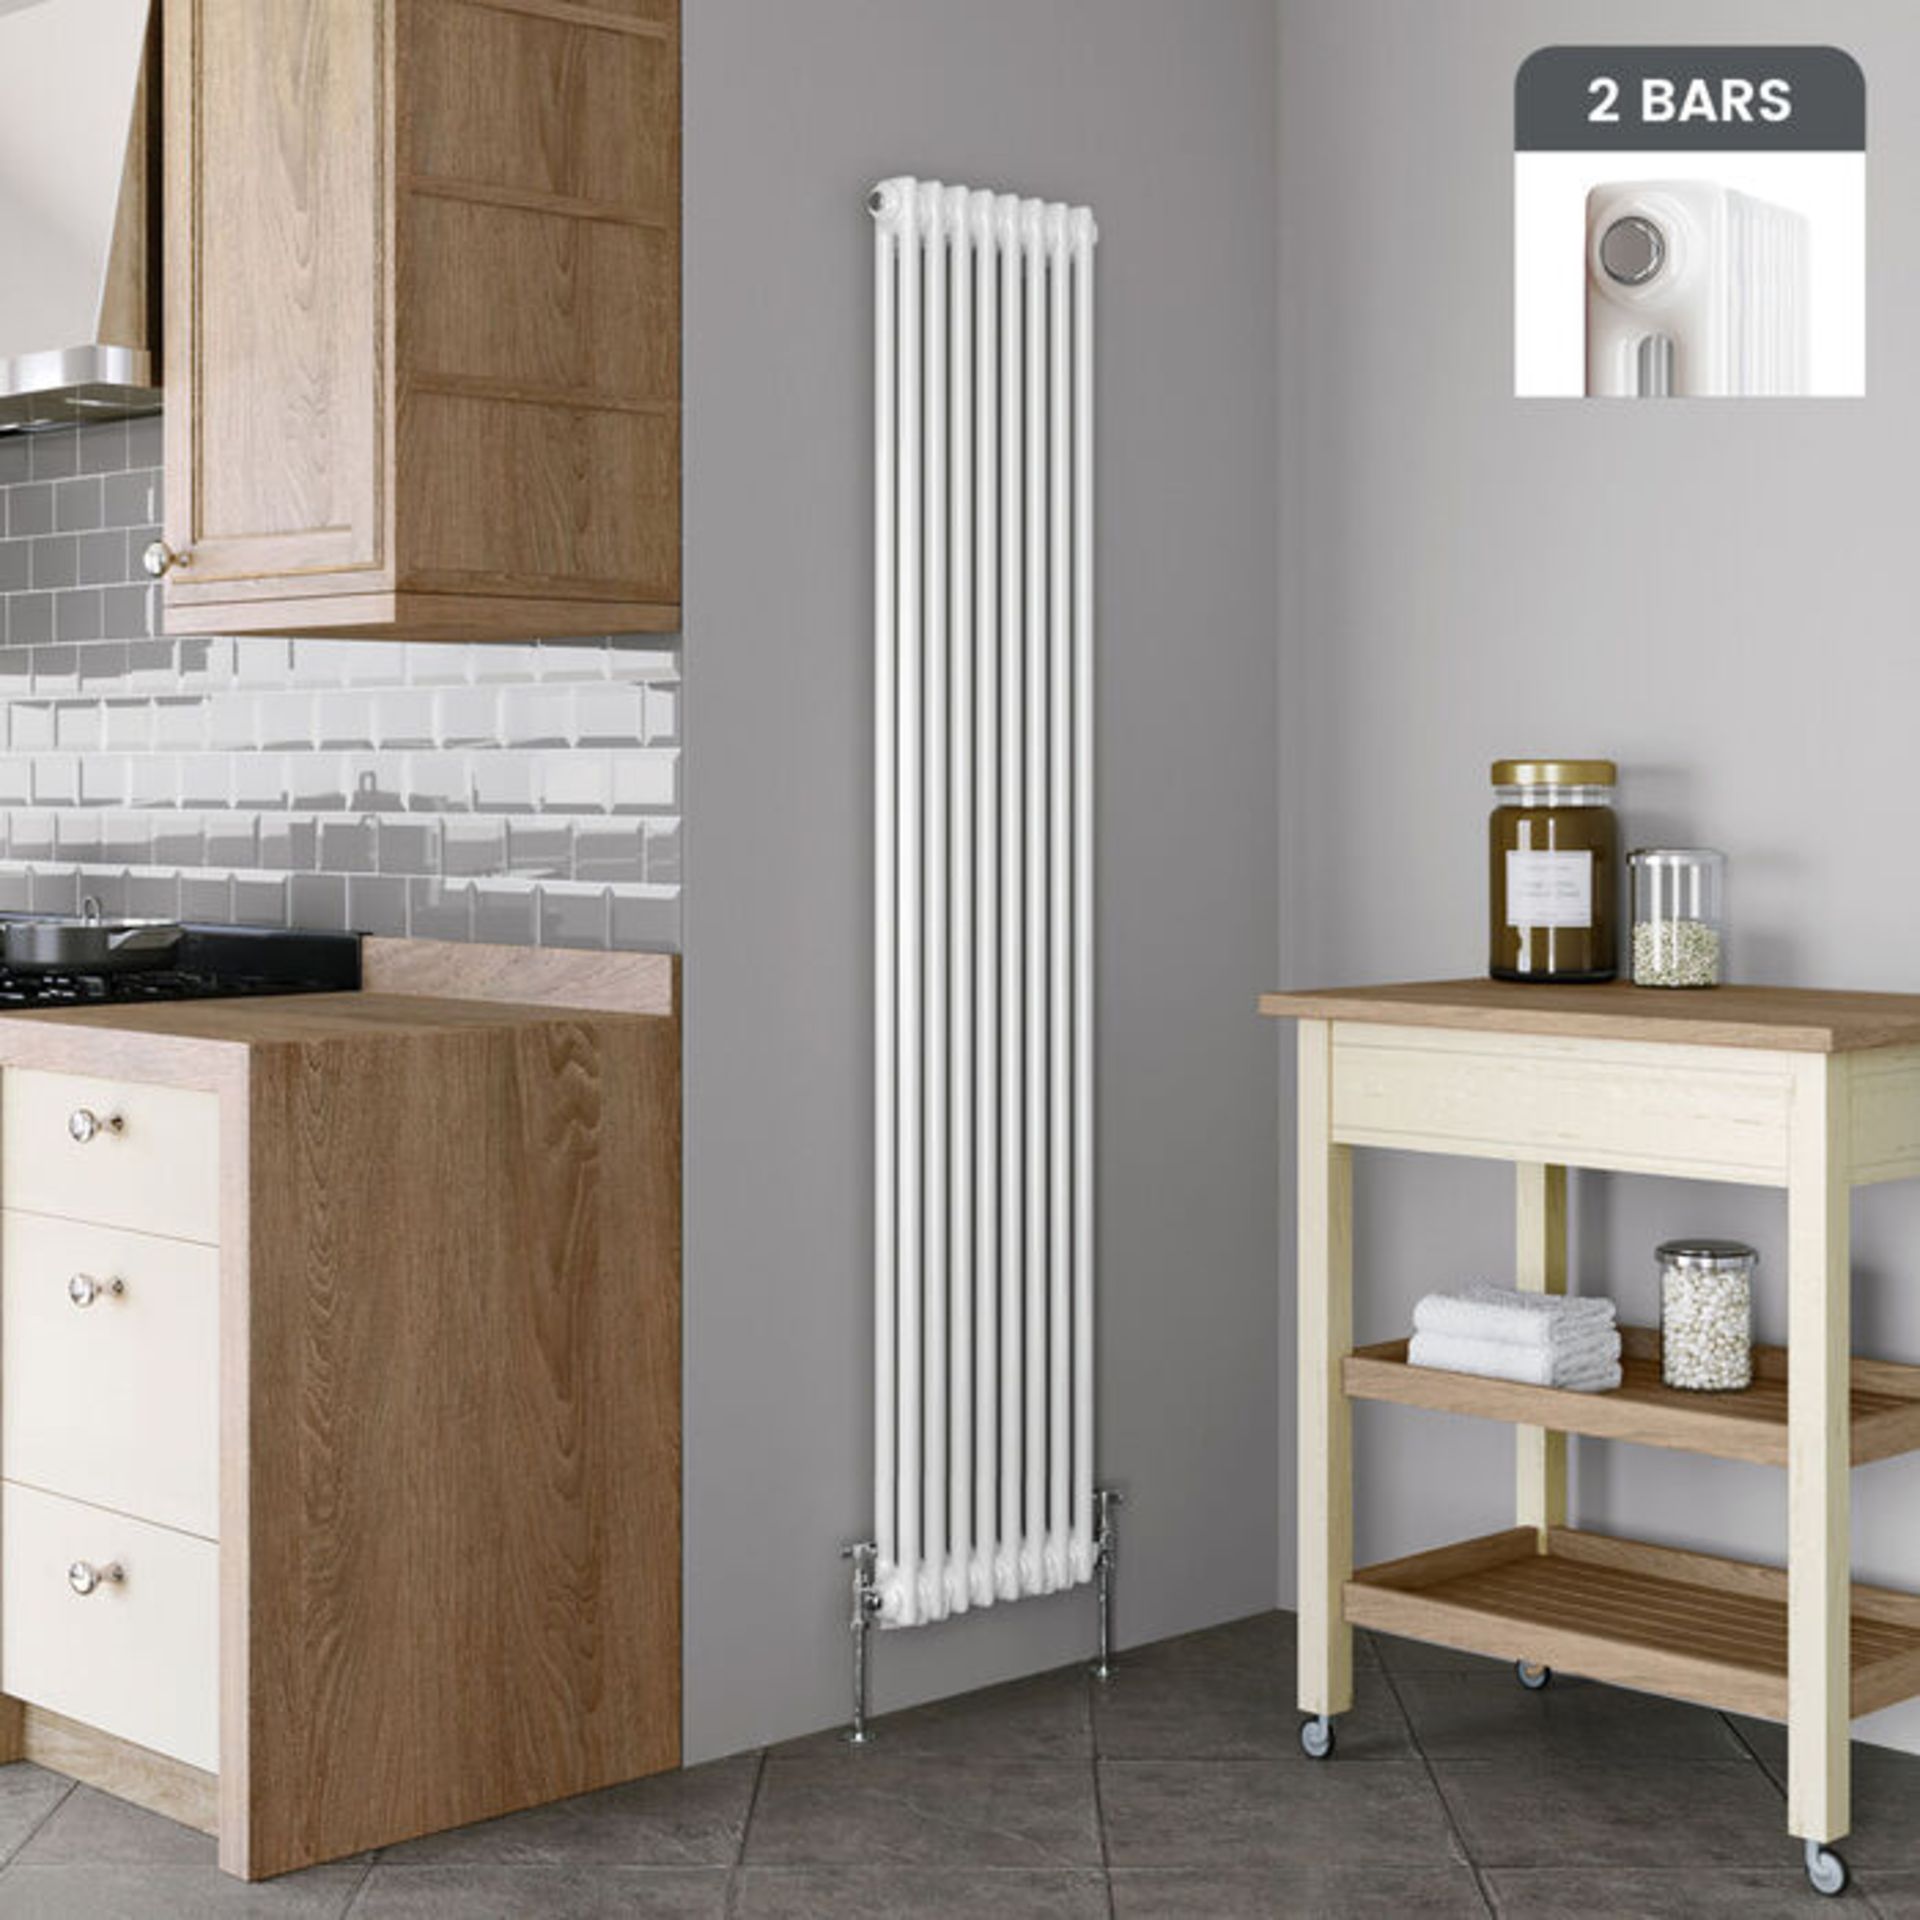 (DD112) 2000x350mm White Double Panel Vertical Colosseum Traditional Radiator. RRP £429.99. Fo...( - Image 3 of 4